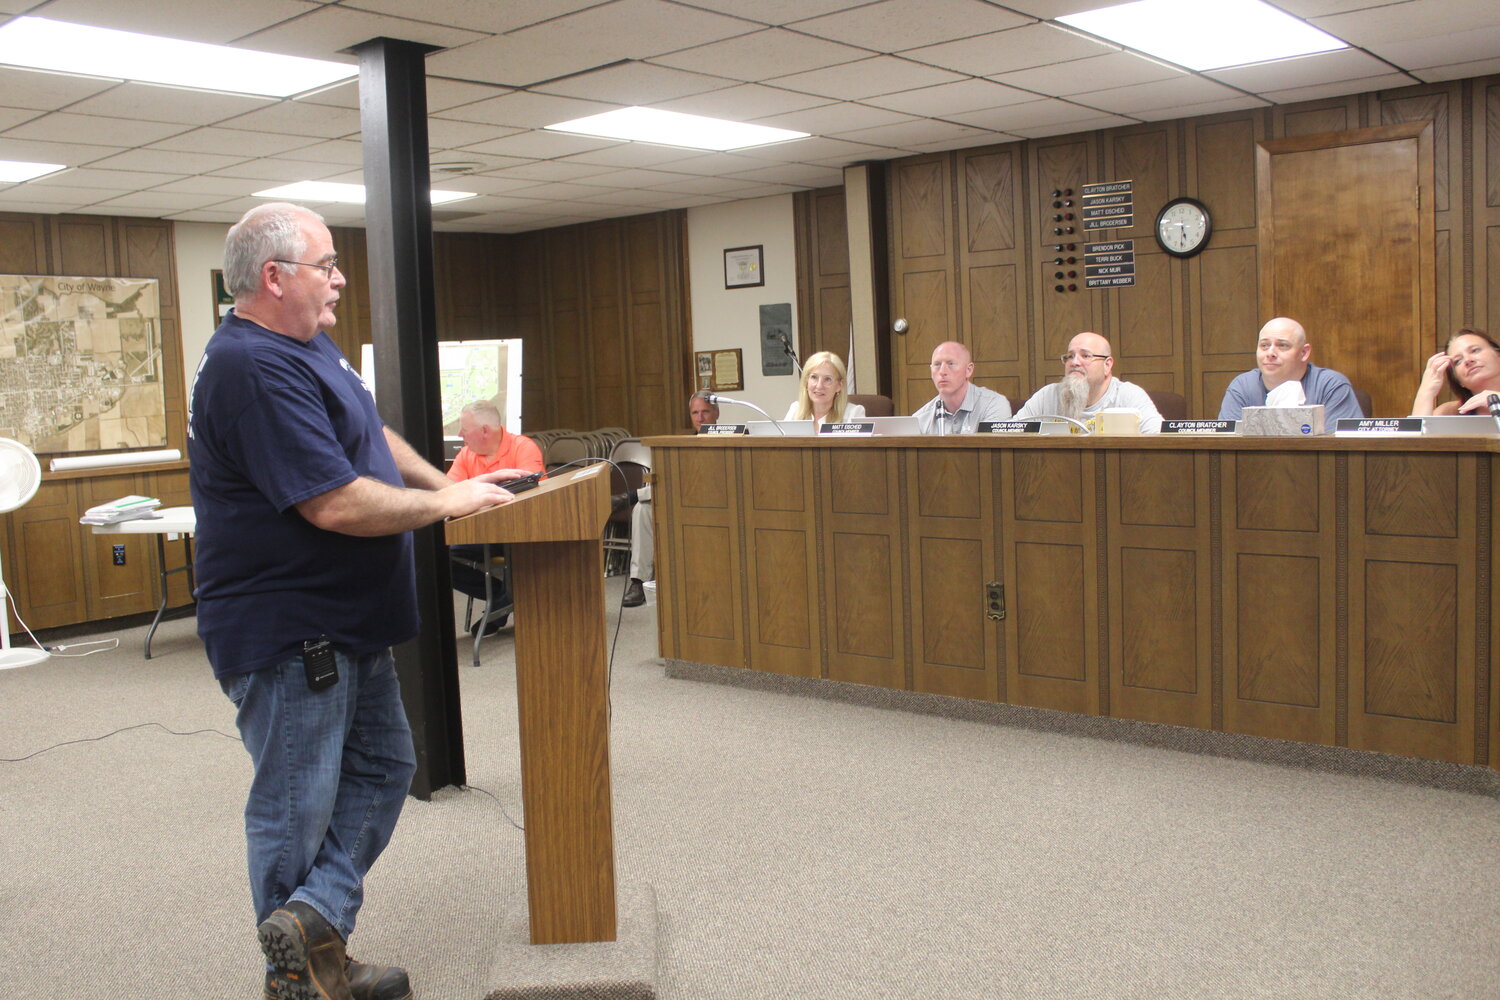 Phil Monahan spoke to the council on Tuesday. He was re-appointed as Fire Chief for the Wayne Volunteer Fire Department. This is his 12th year in this position.